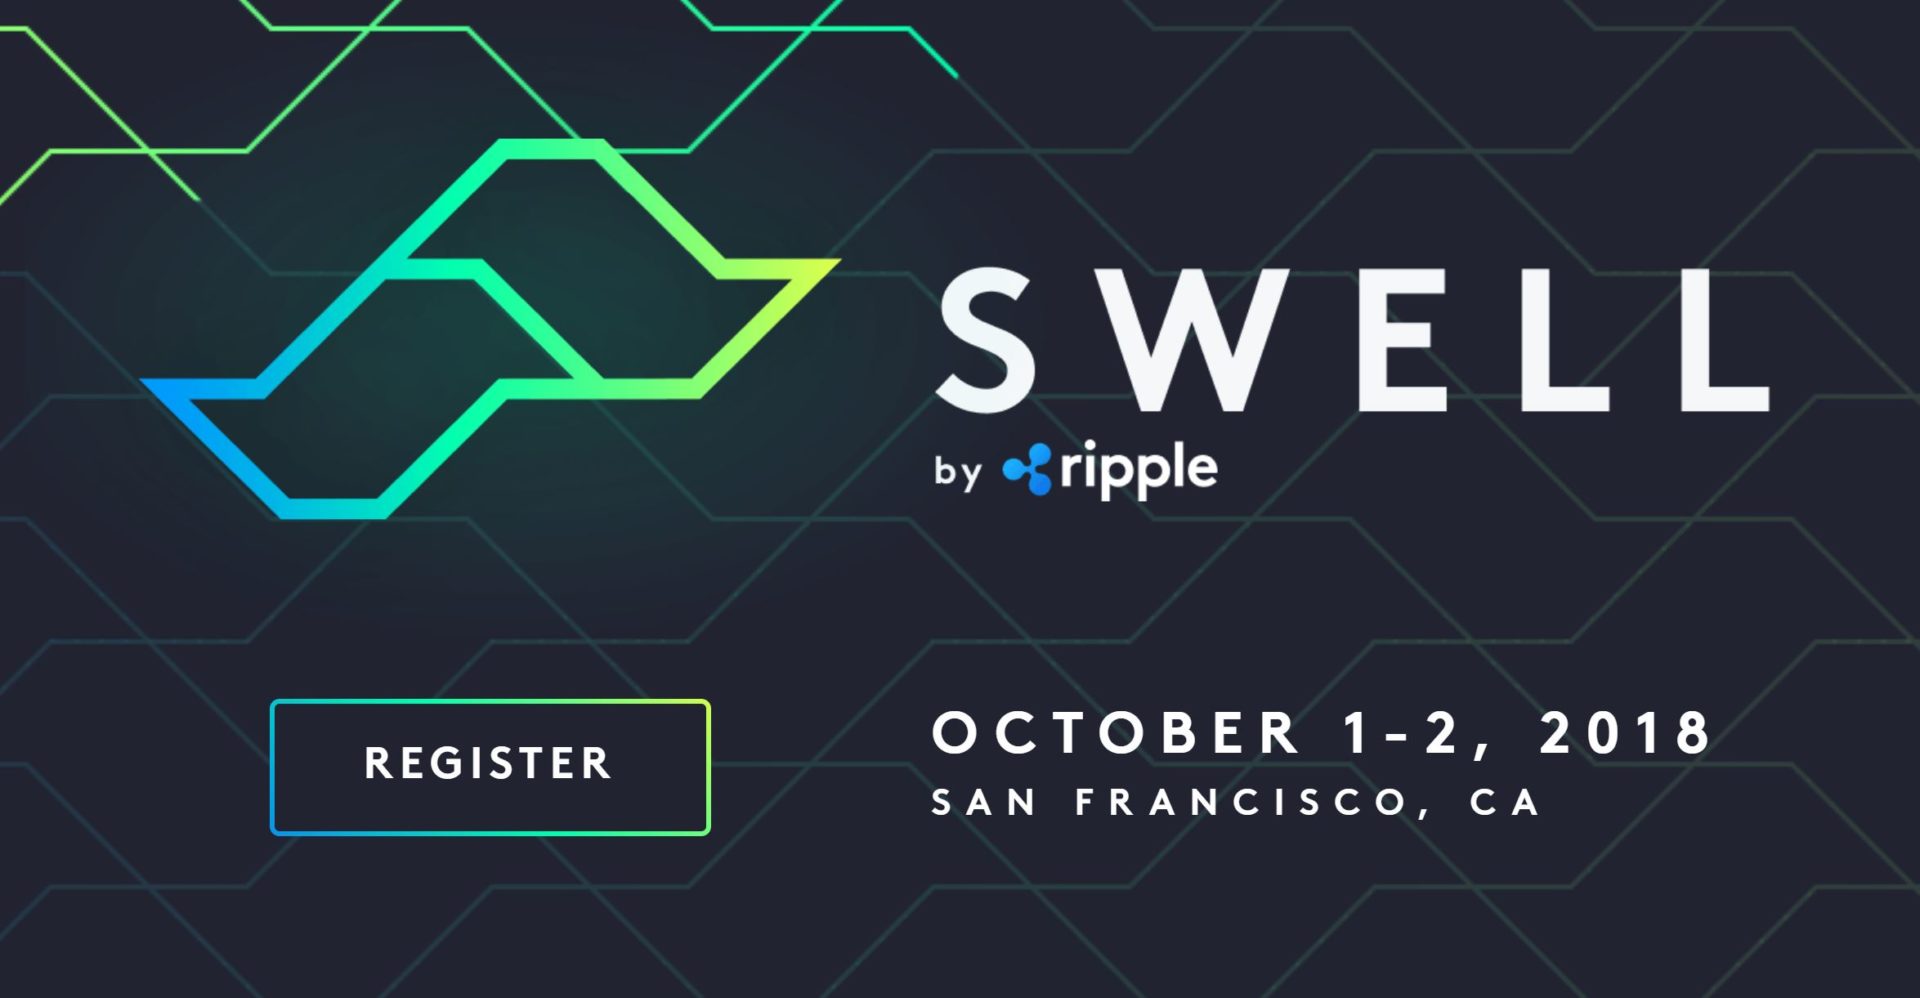 All Eyes Are on Next Week's Swell Event by Ripple 10